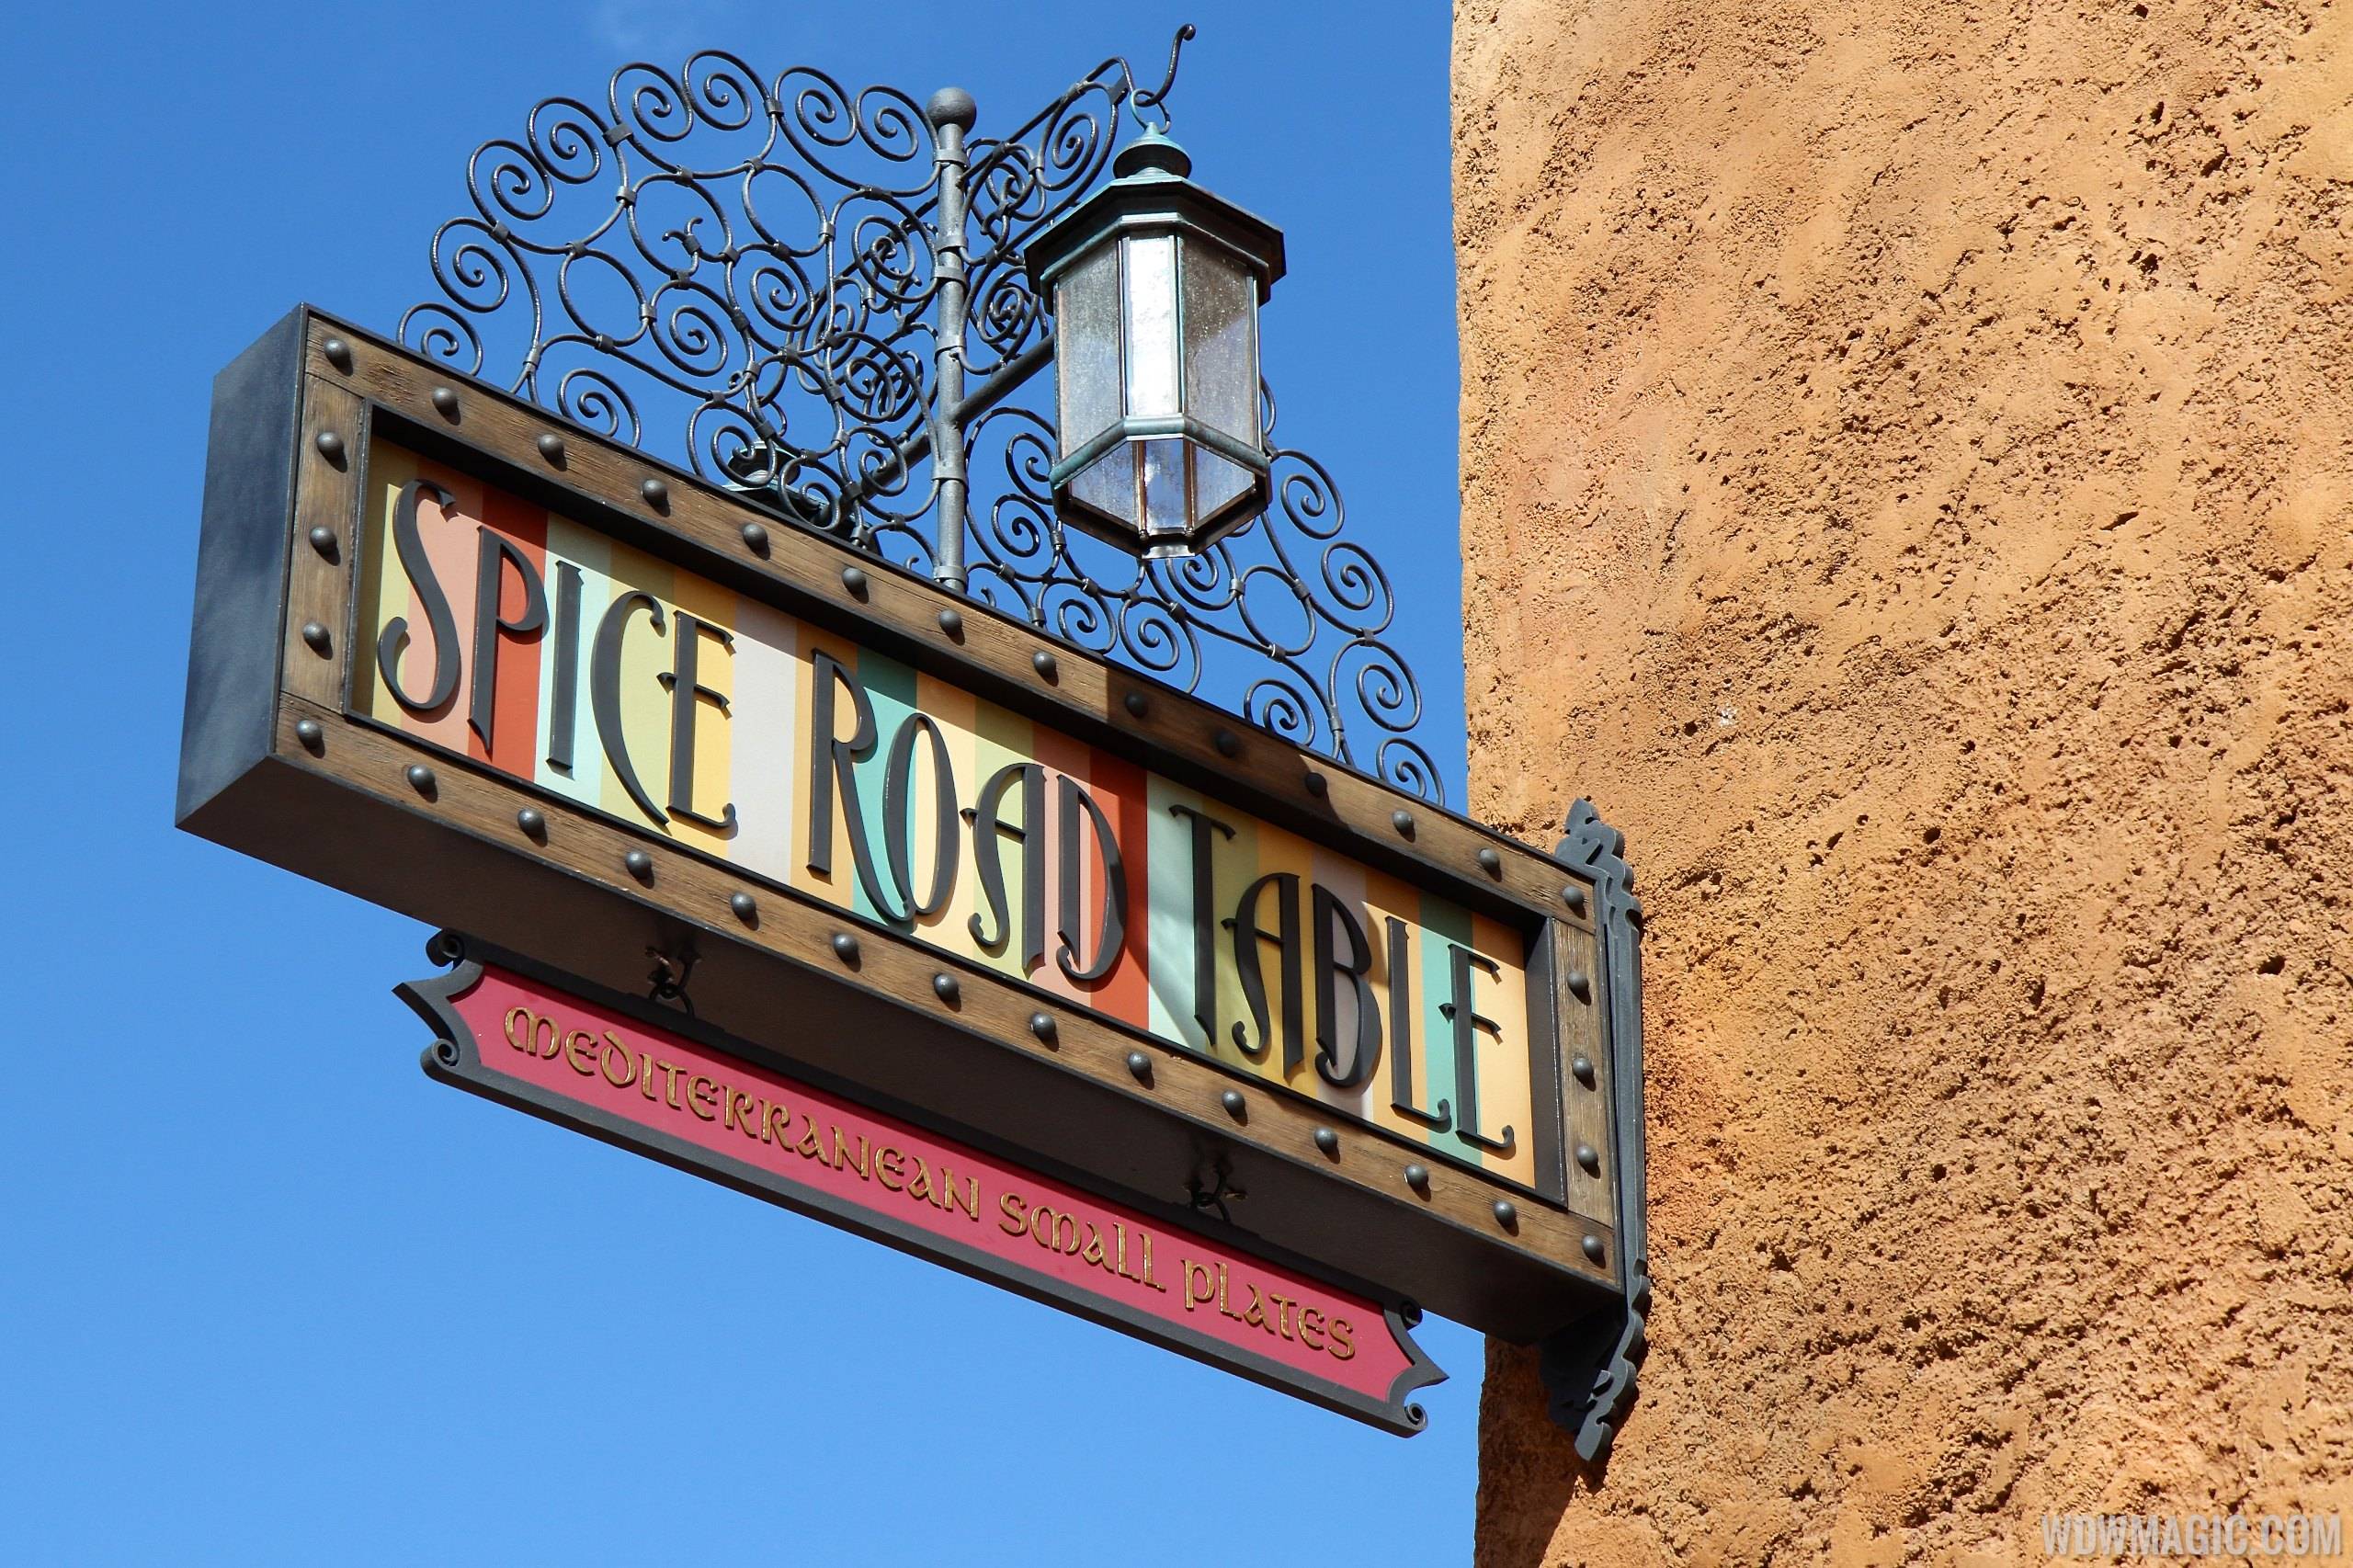 Spice Road Table signage